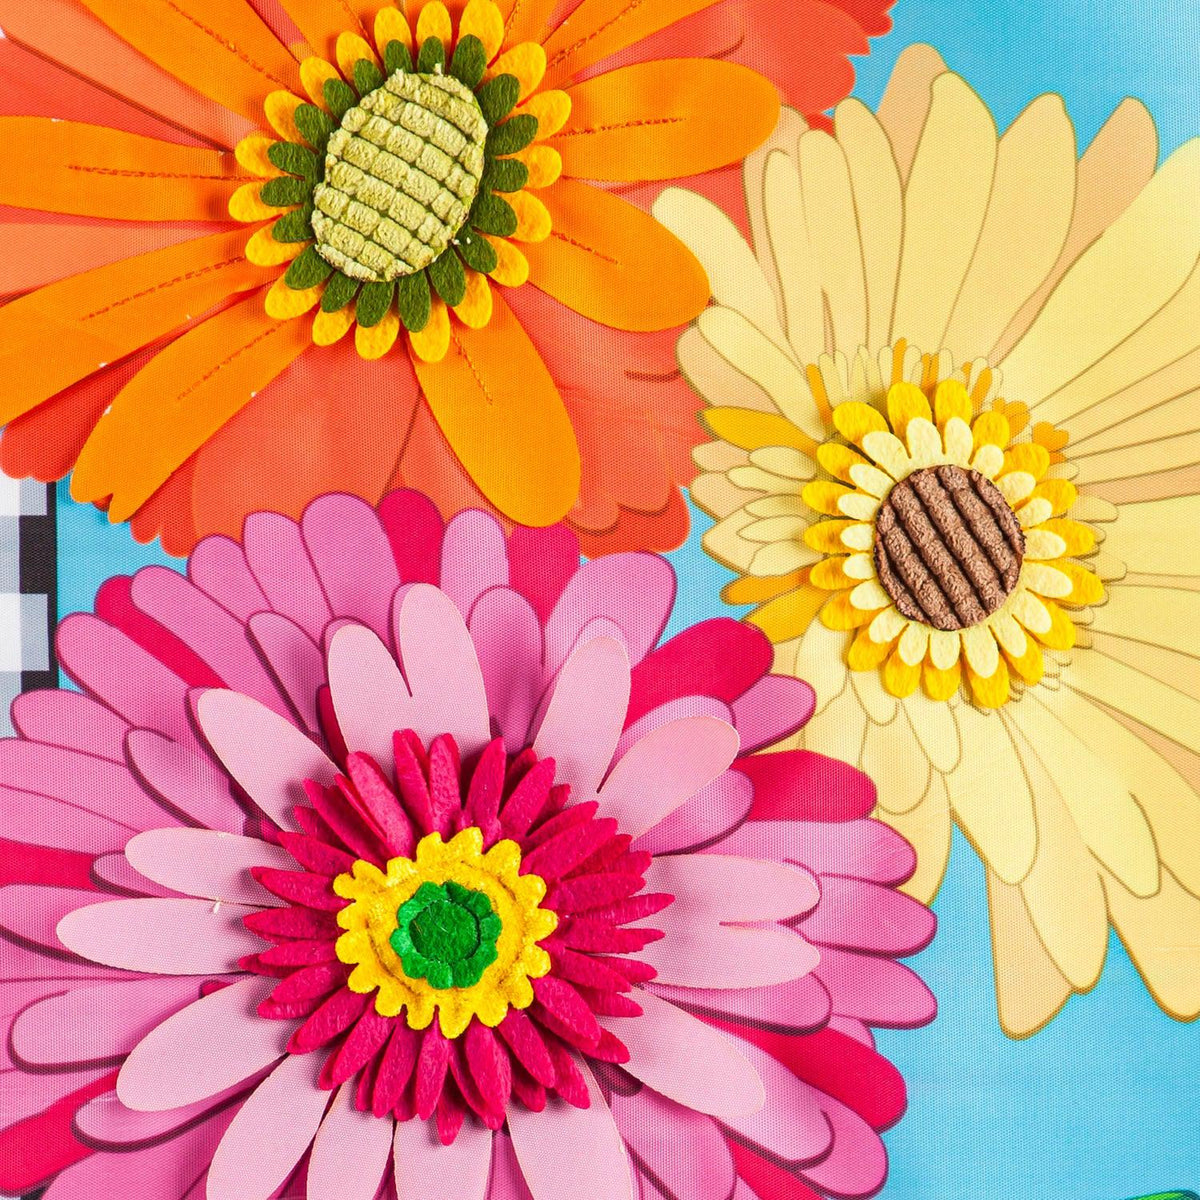 The Gerbera Daisy Trio garden flag features an orange, a yellow, and a pink Gerbera Daisy surrounded by a black and white checked border.